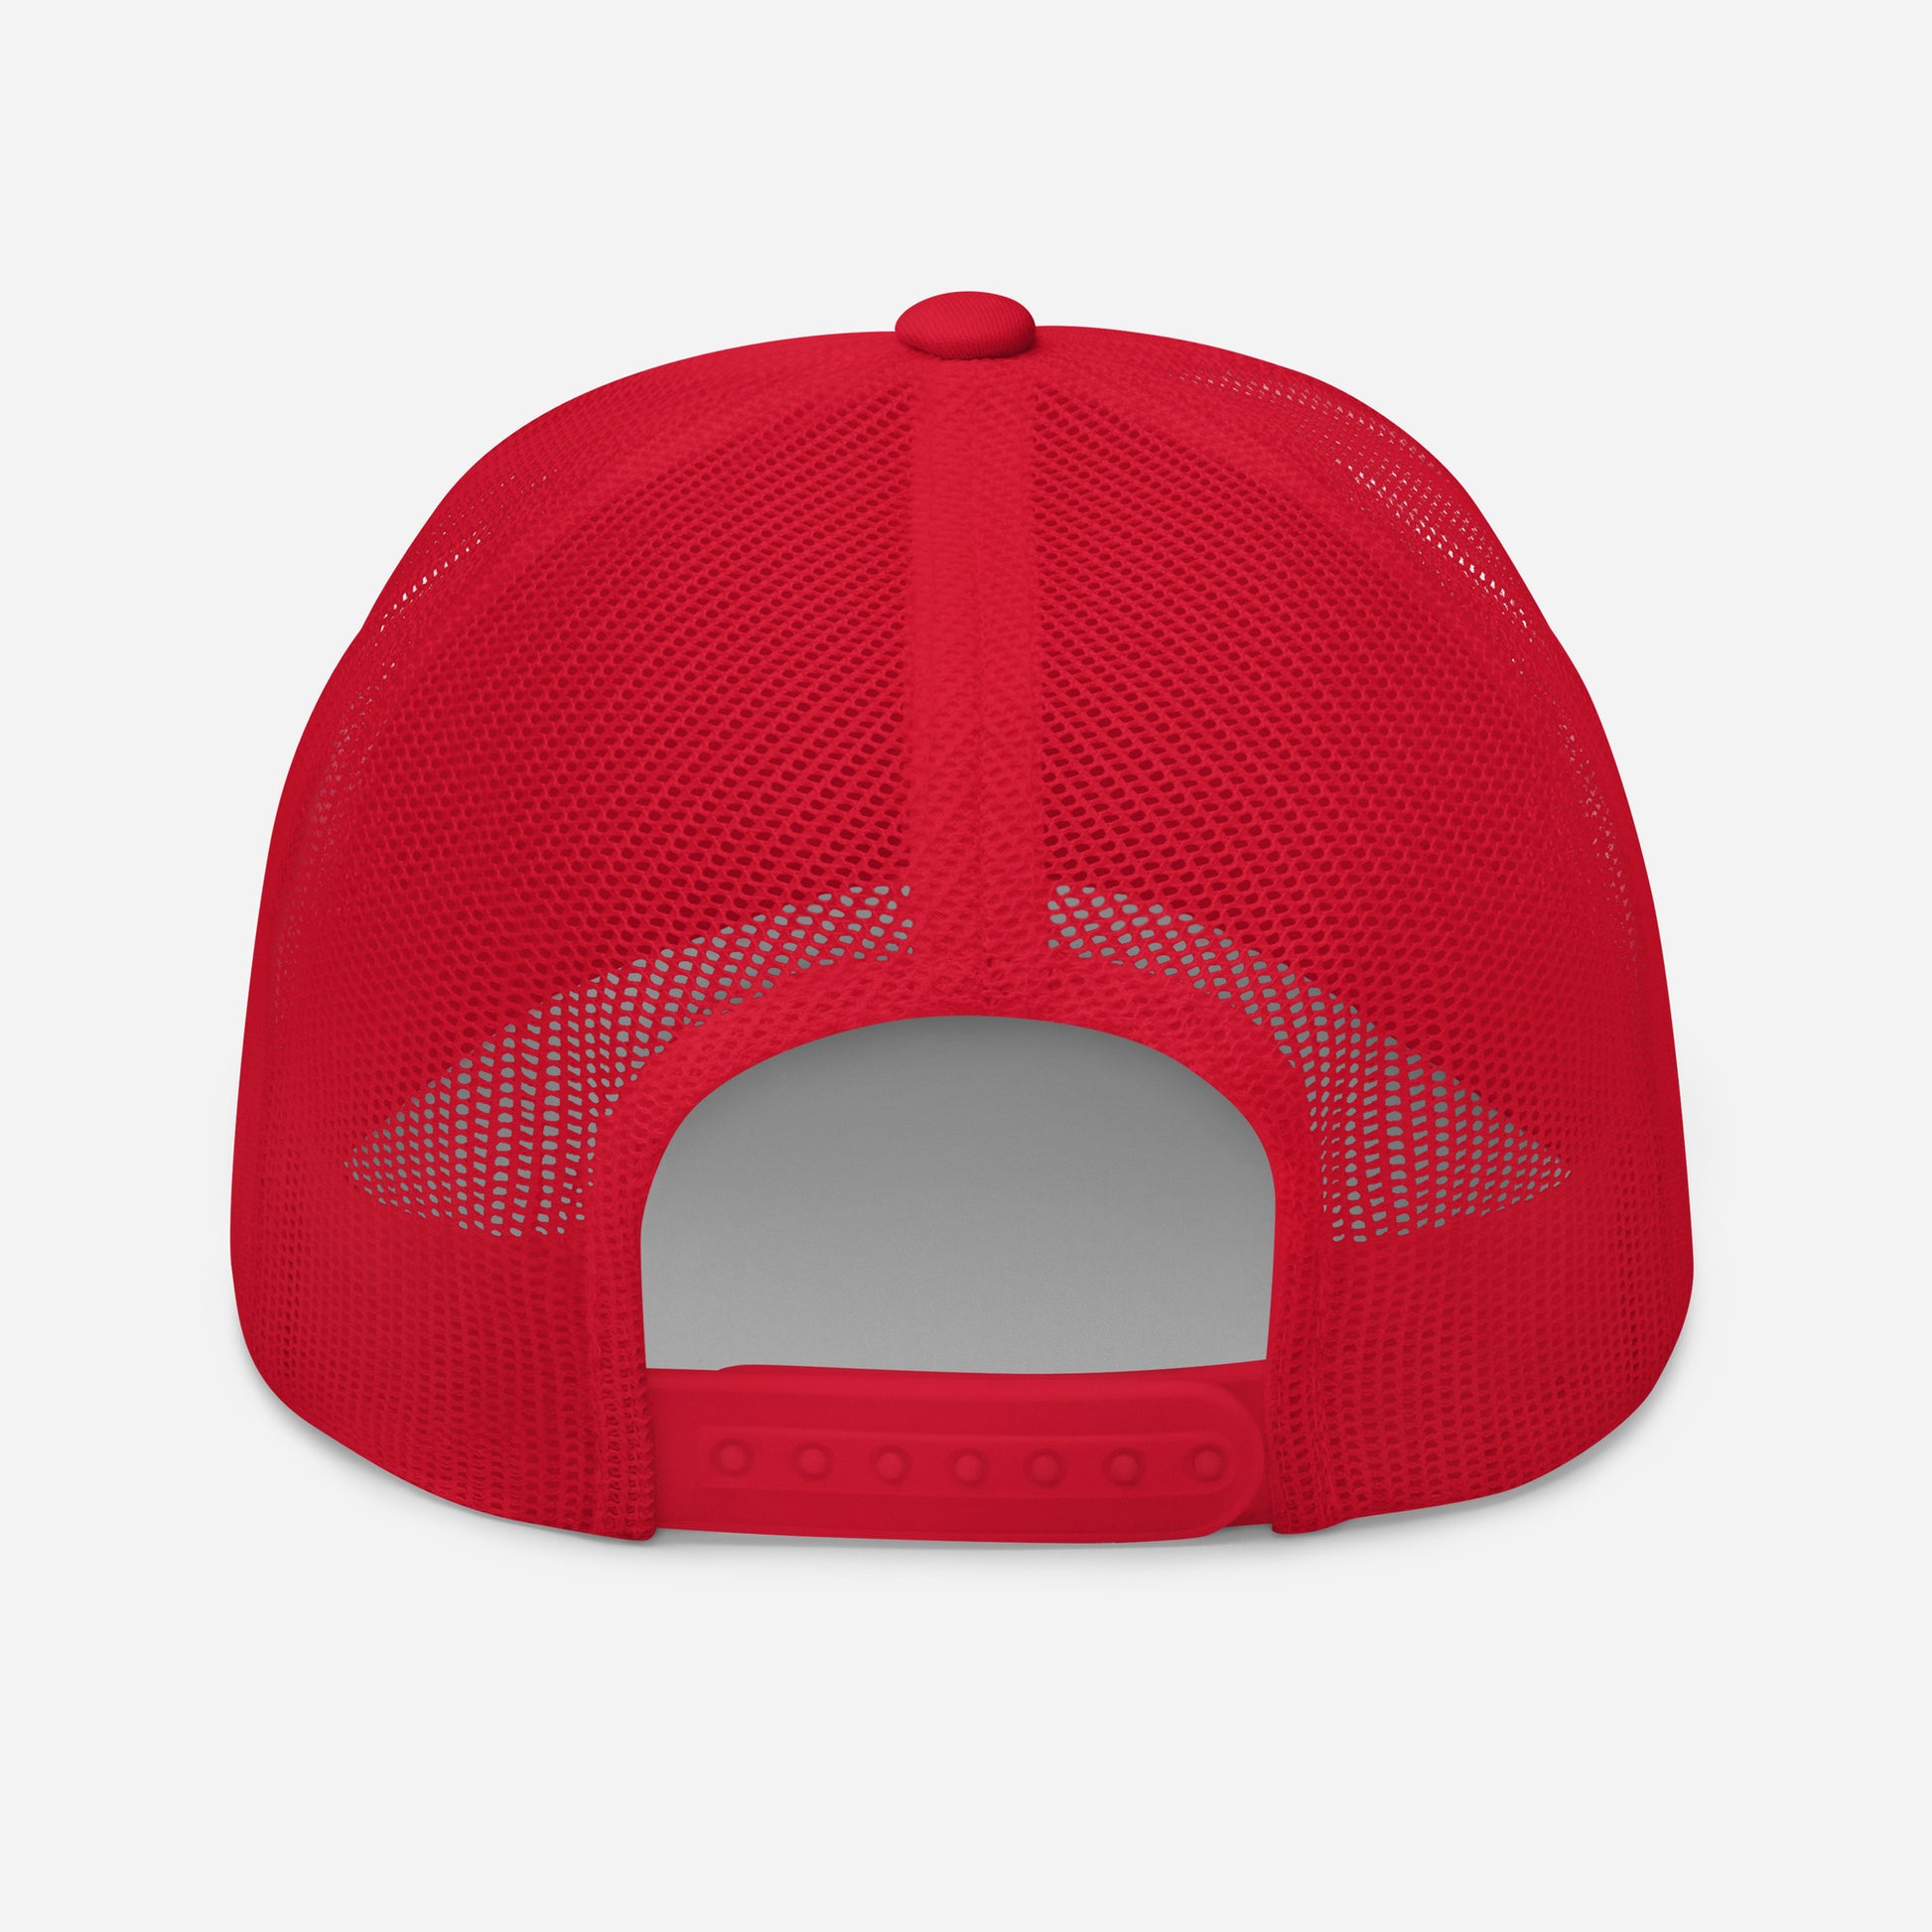 cap-from-the-back-with-cuban-flag